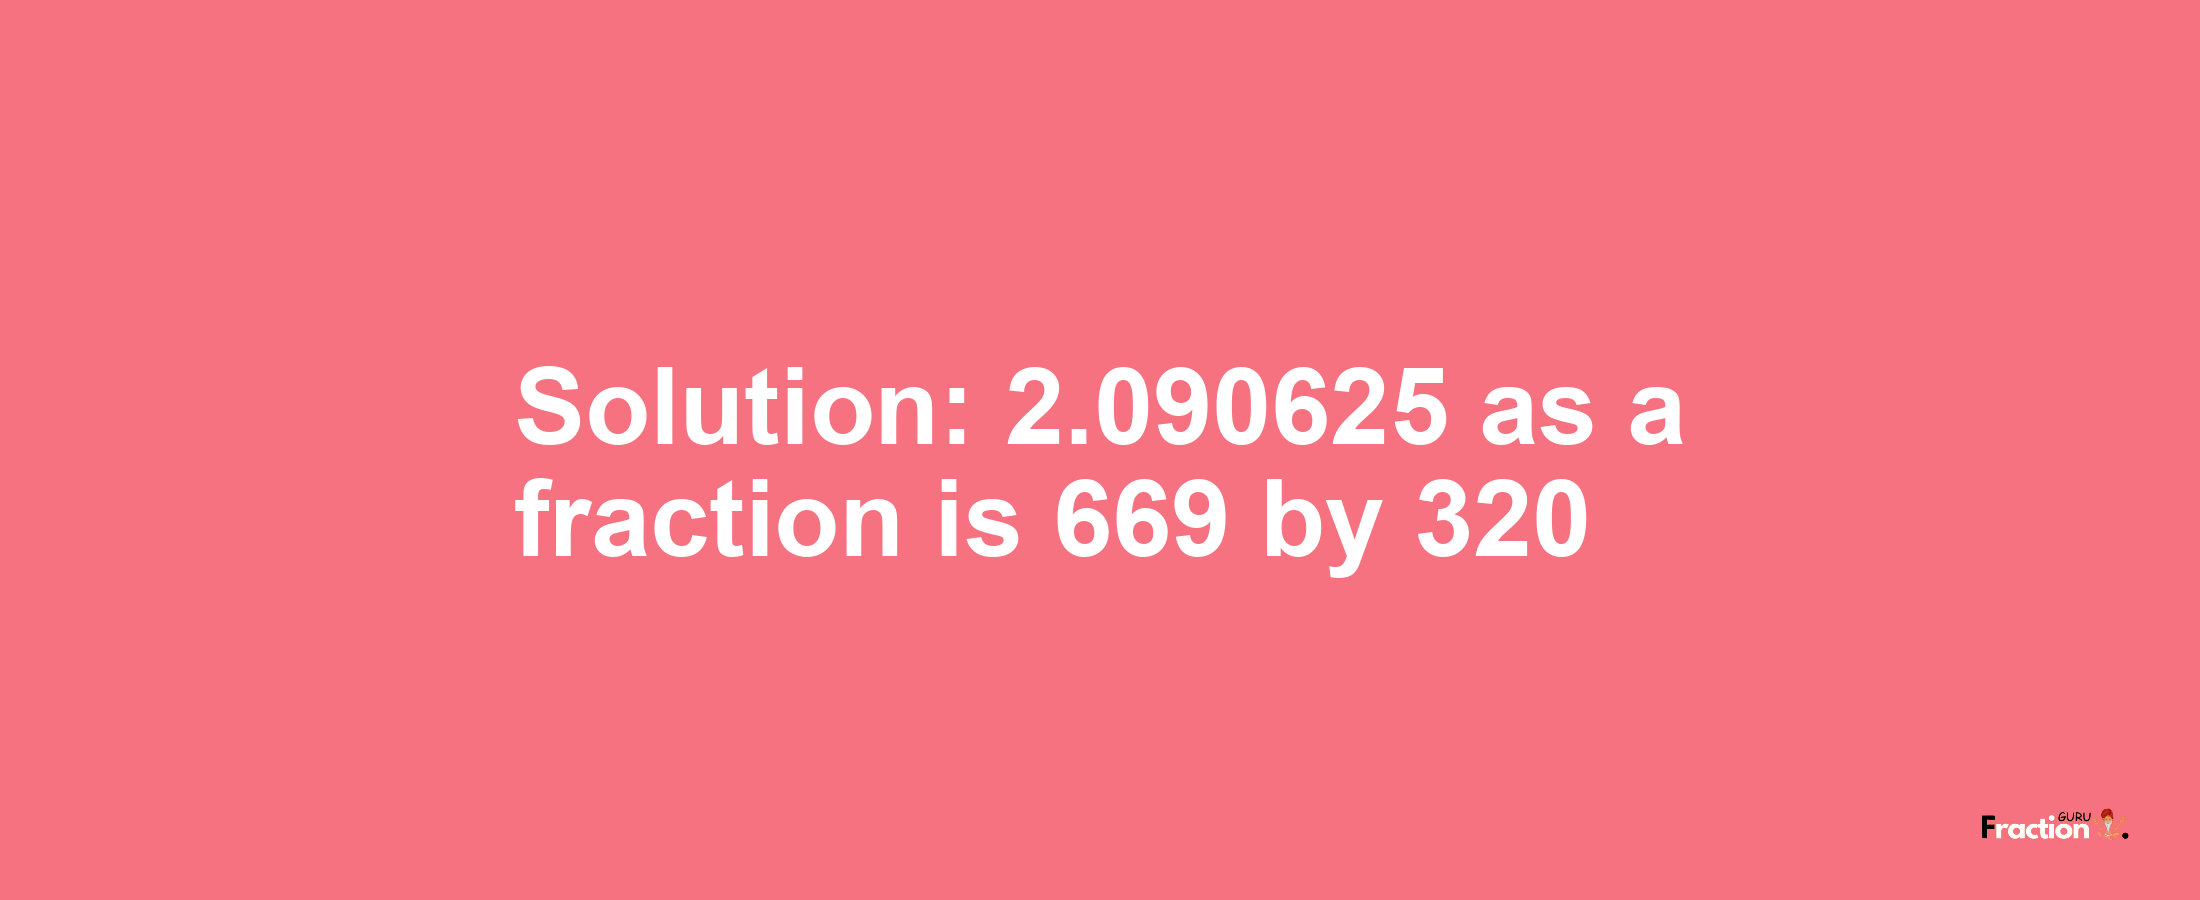 Solution:2.090625 as a fraction is 669/320